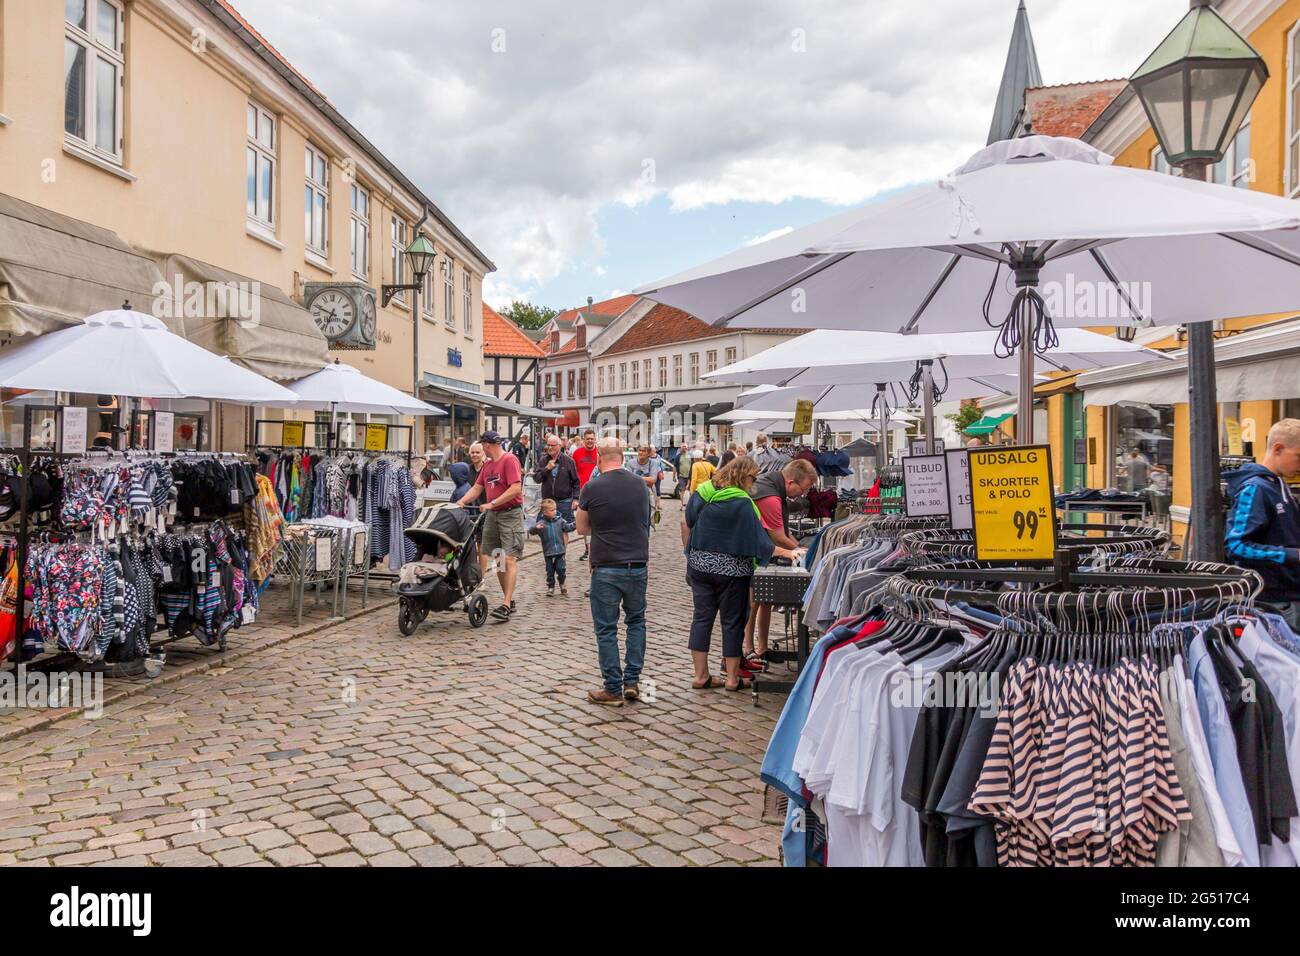 Ebeltoft, Denmark - 20 July 2020: Many people on the old pedestrian street,  People are out shopping, shops along the pedestrian street Stock Photo -  Alamy